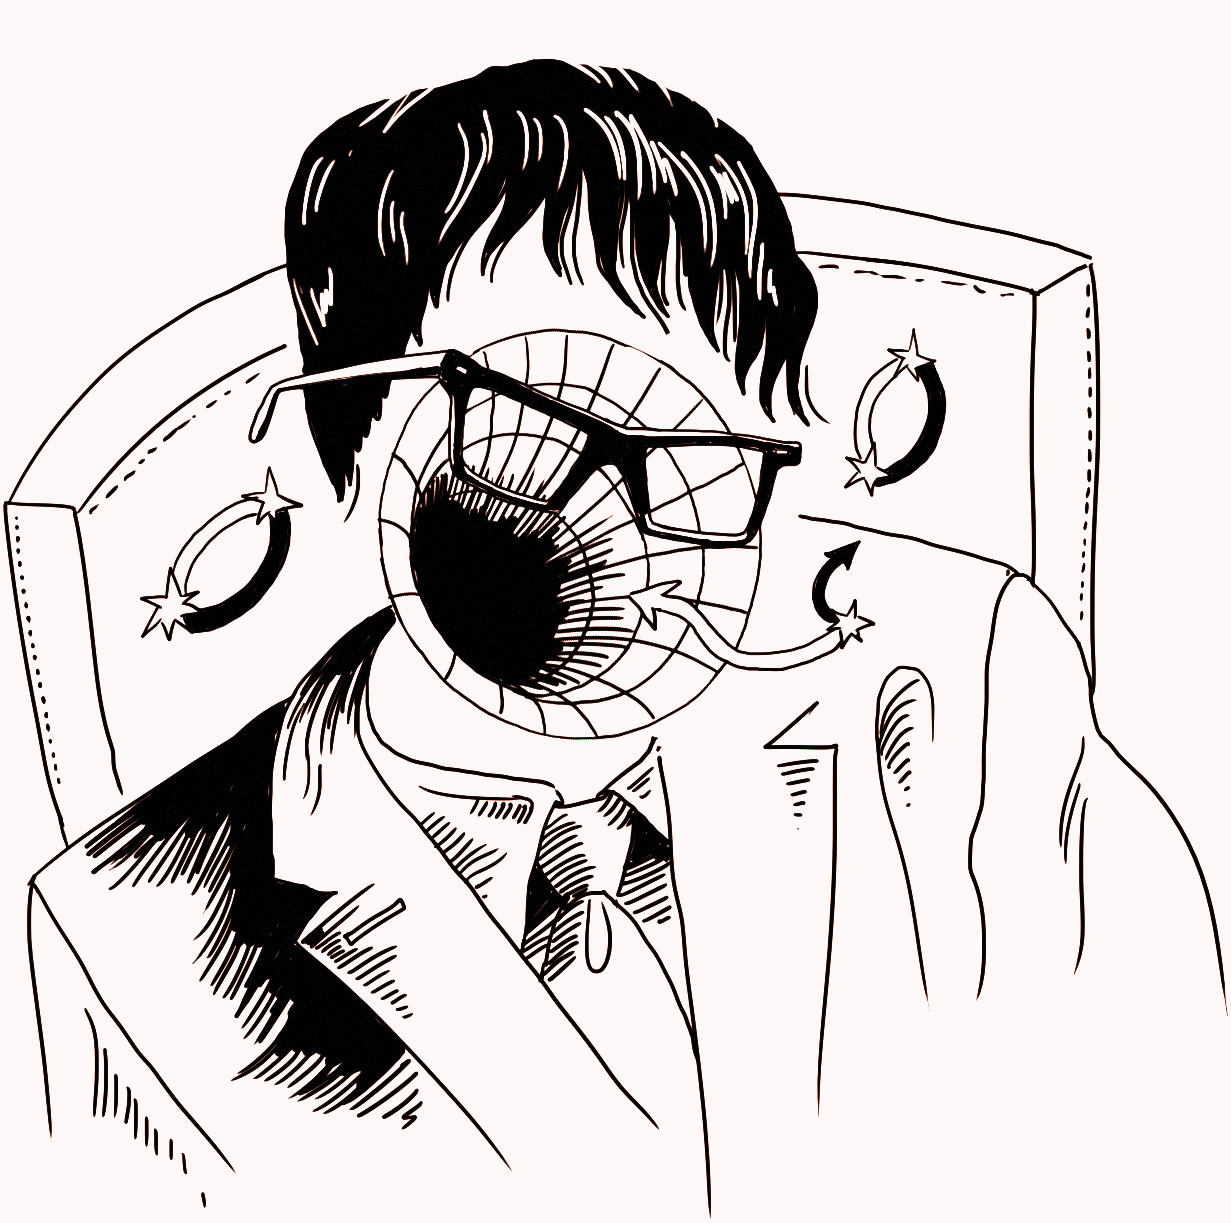 Illustration of Stephen Hawking with black hole over face